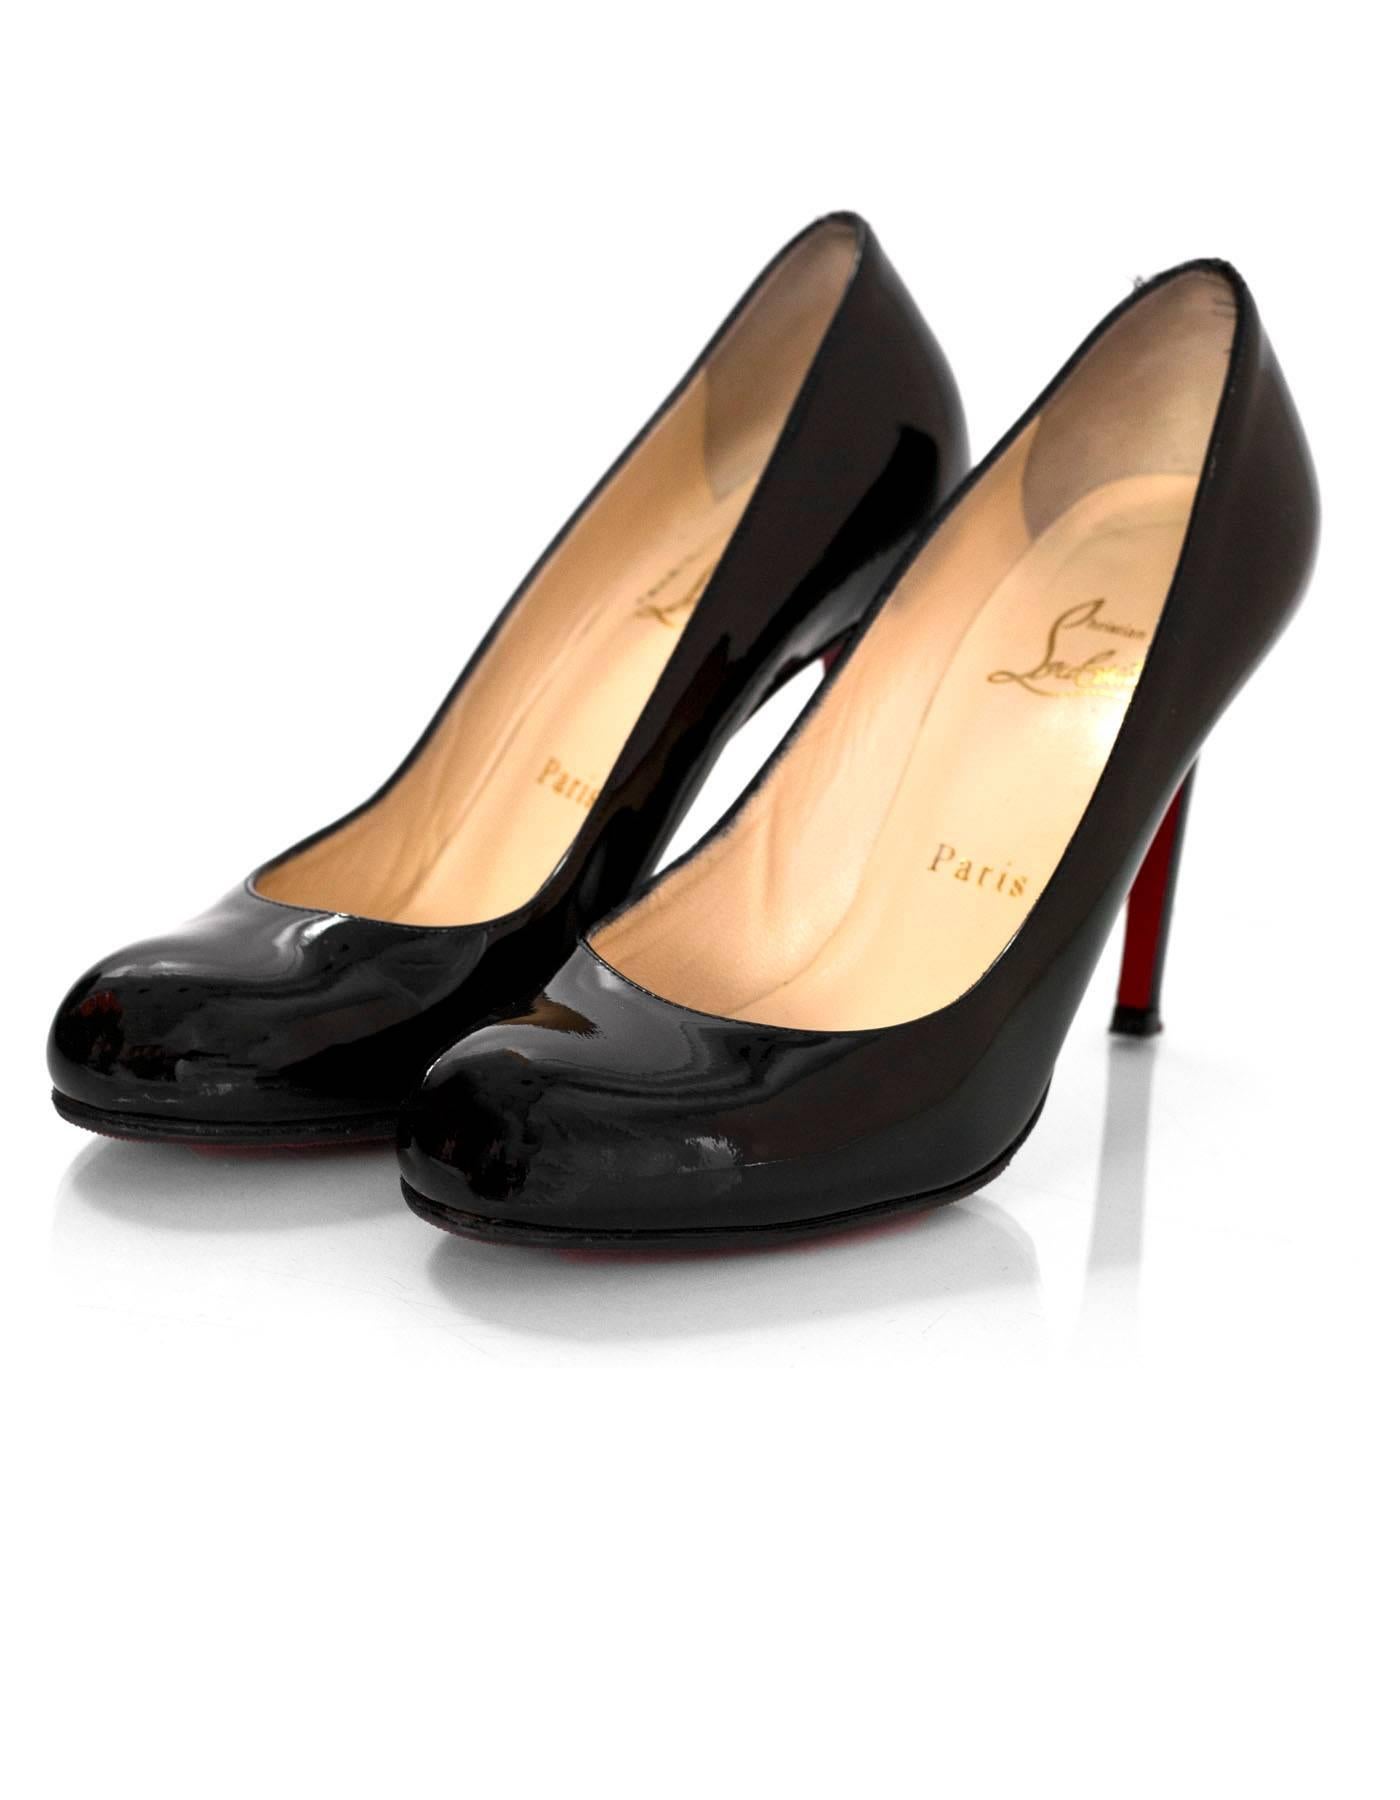 Christian Louboutin Black Patent Simple 100mm Pumps Sz 36.5

Made In: Italy
Color: Black
Materials: Patent leather
Closure/Opening: Slide on
Sole Stamp: Christian Louboutin Made in Italy 36.5
Retail Price: $675 + tax
Overall Condition: Very good